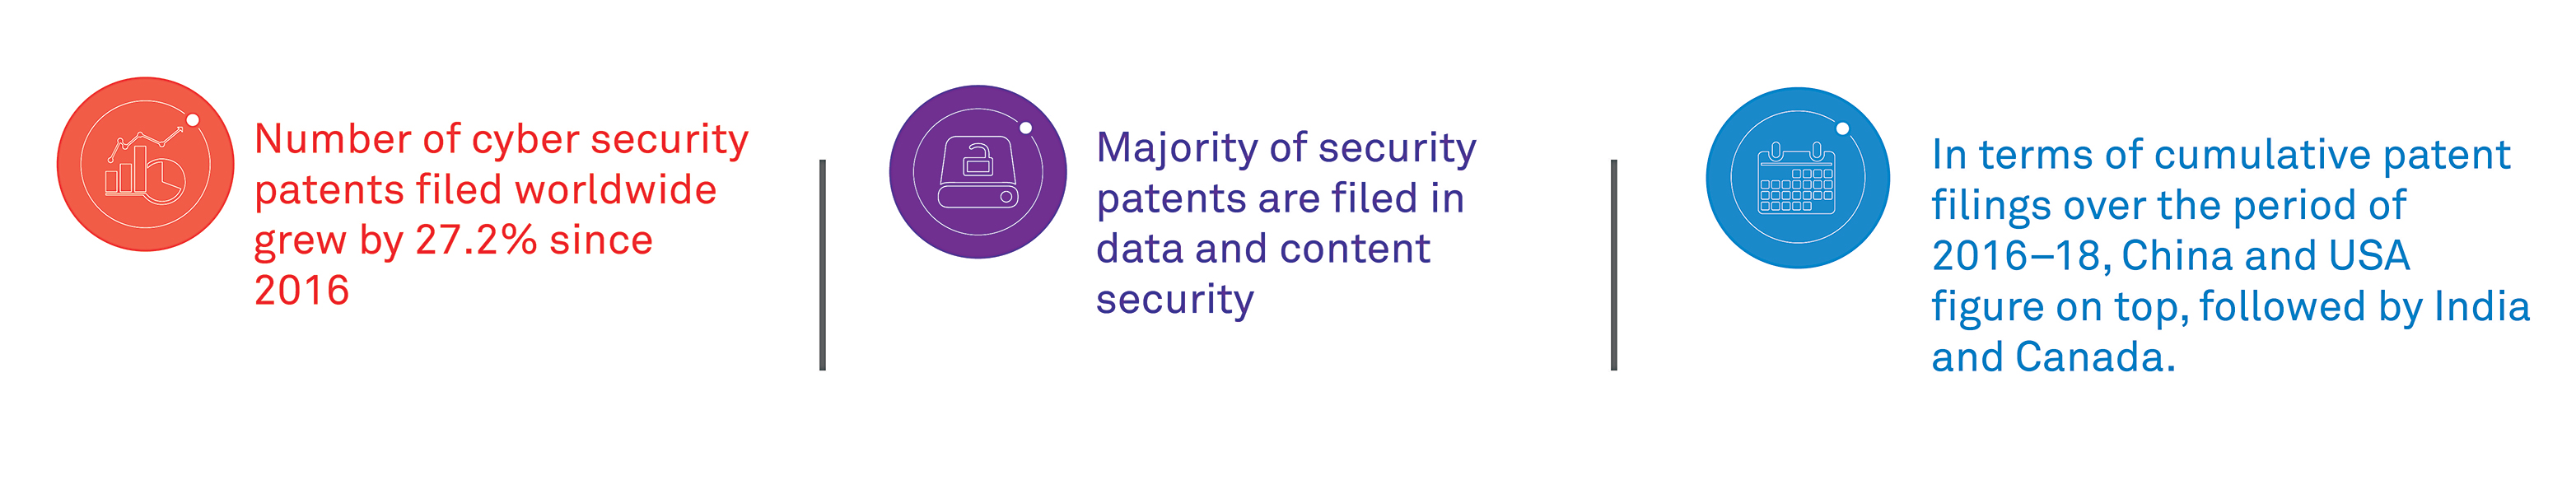 The State of Cybersecurity Report 2019 